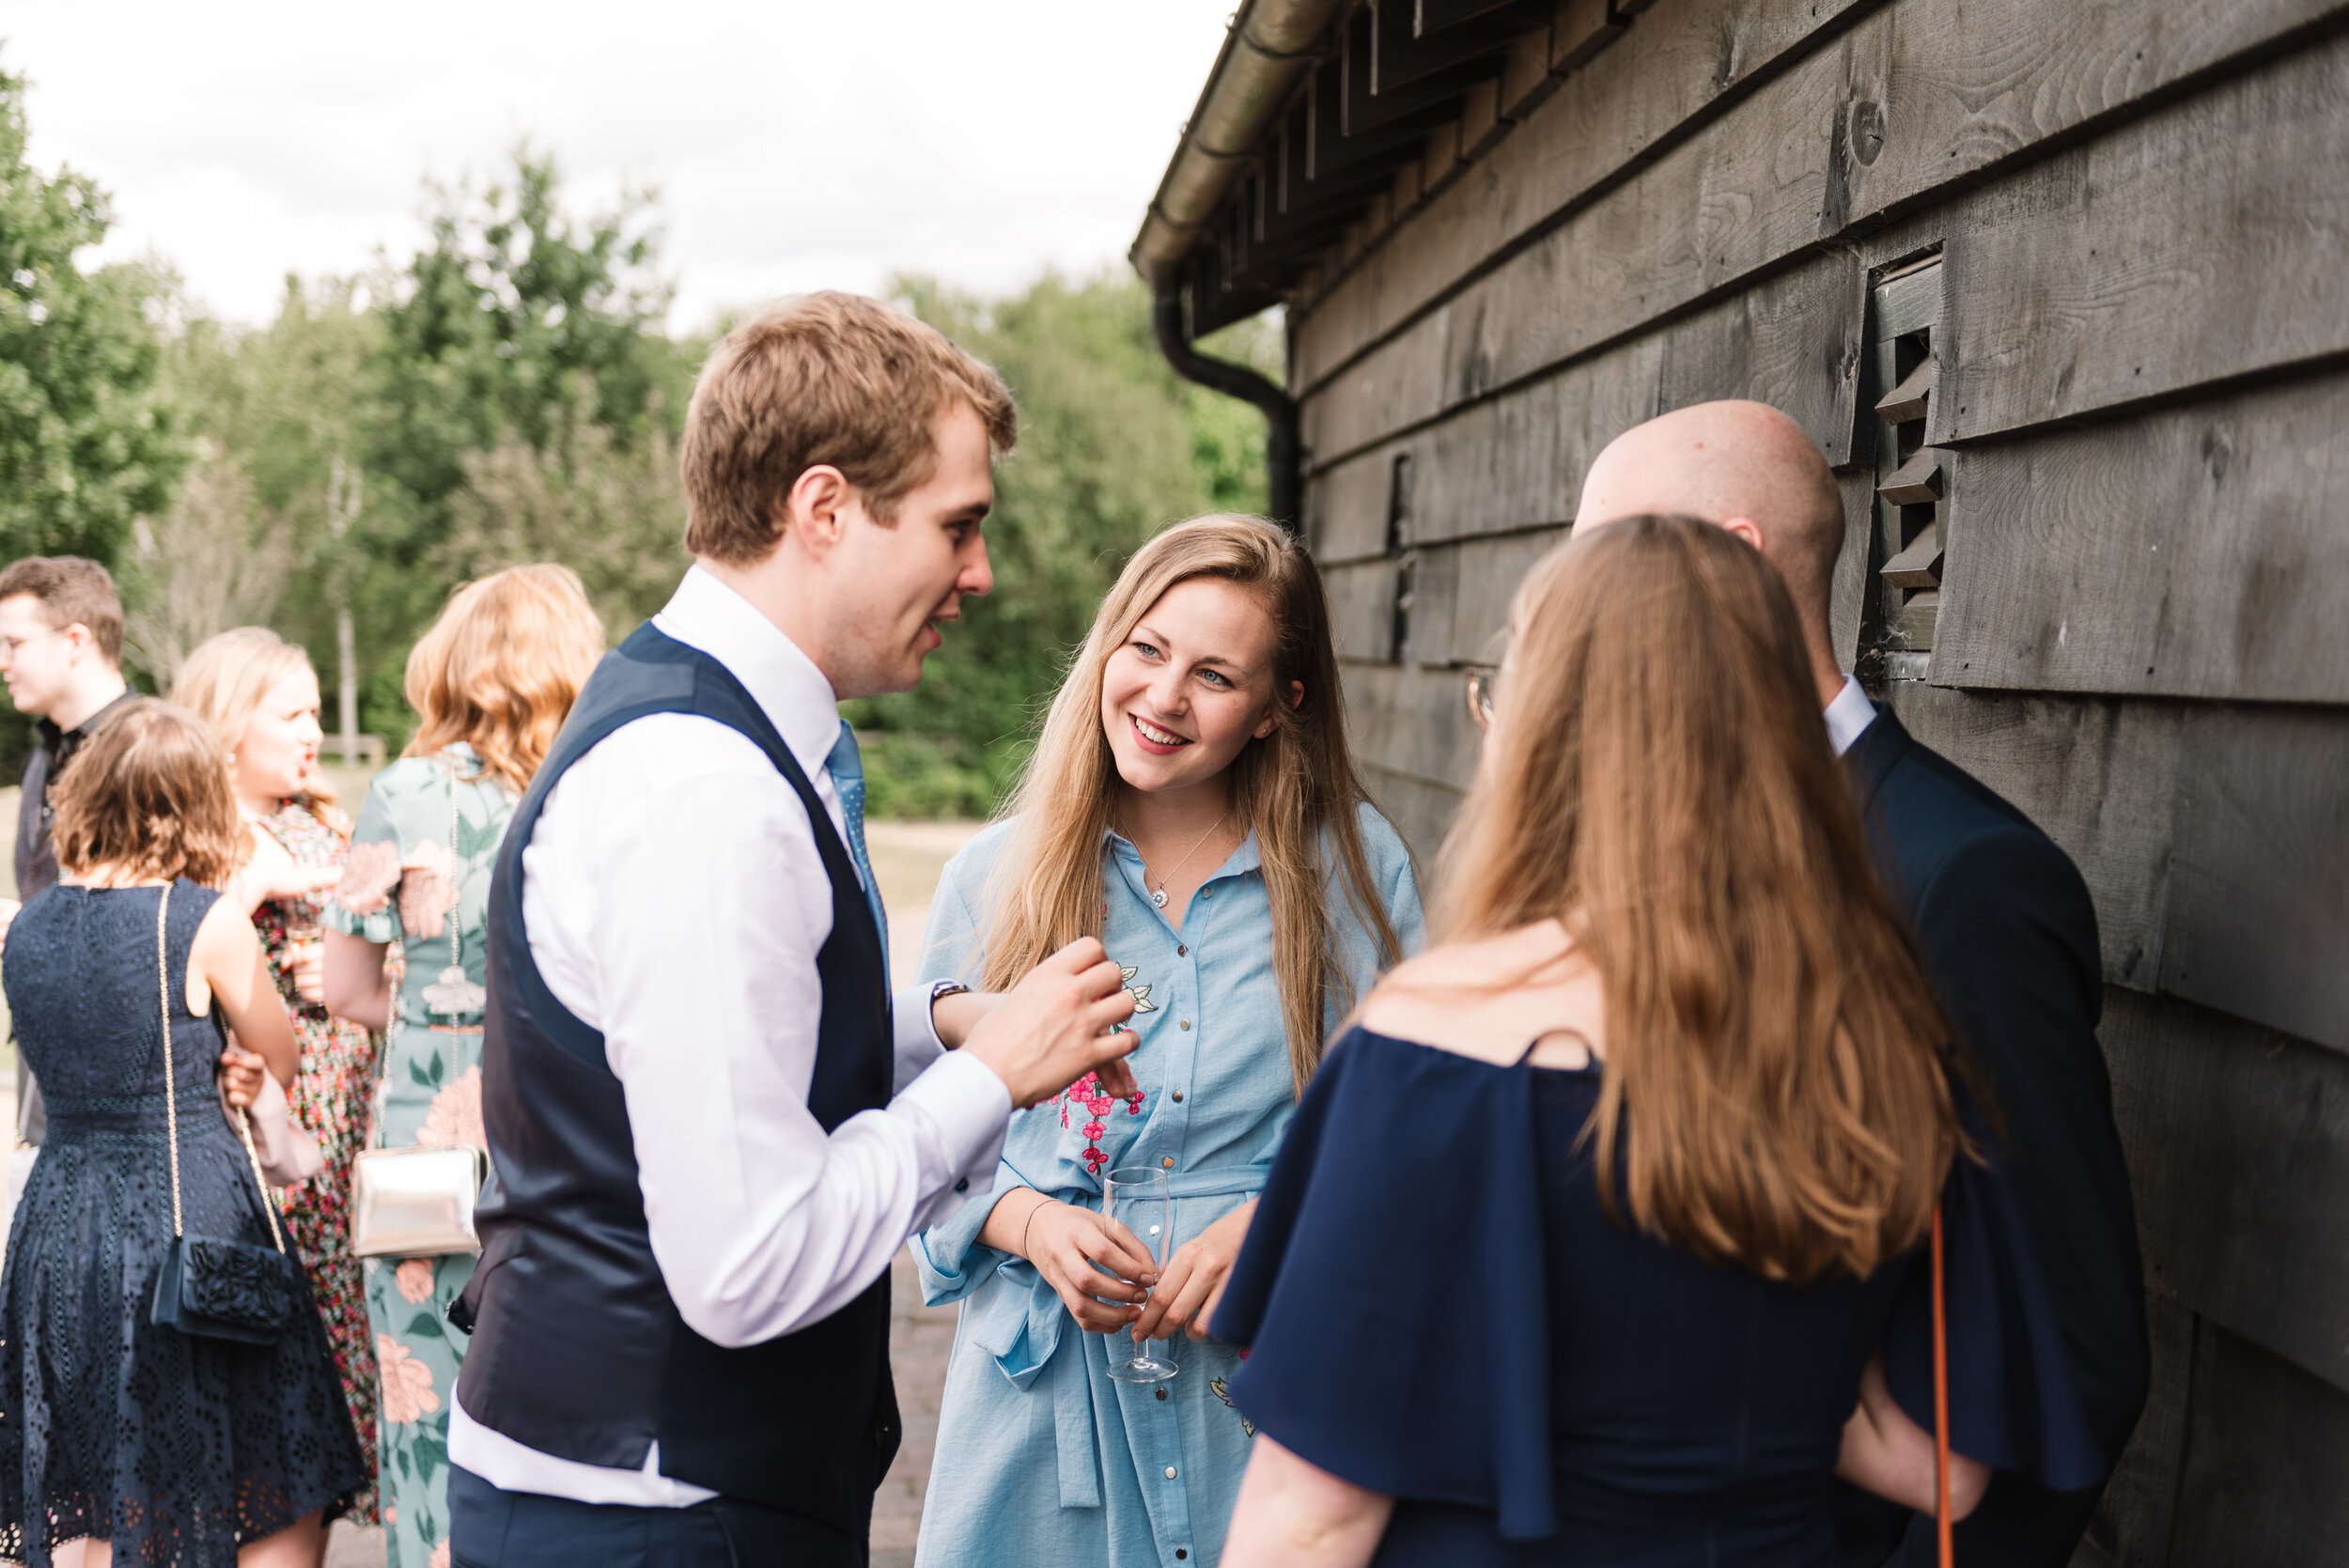 Groom talking to guests outside at wedding reception